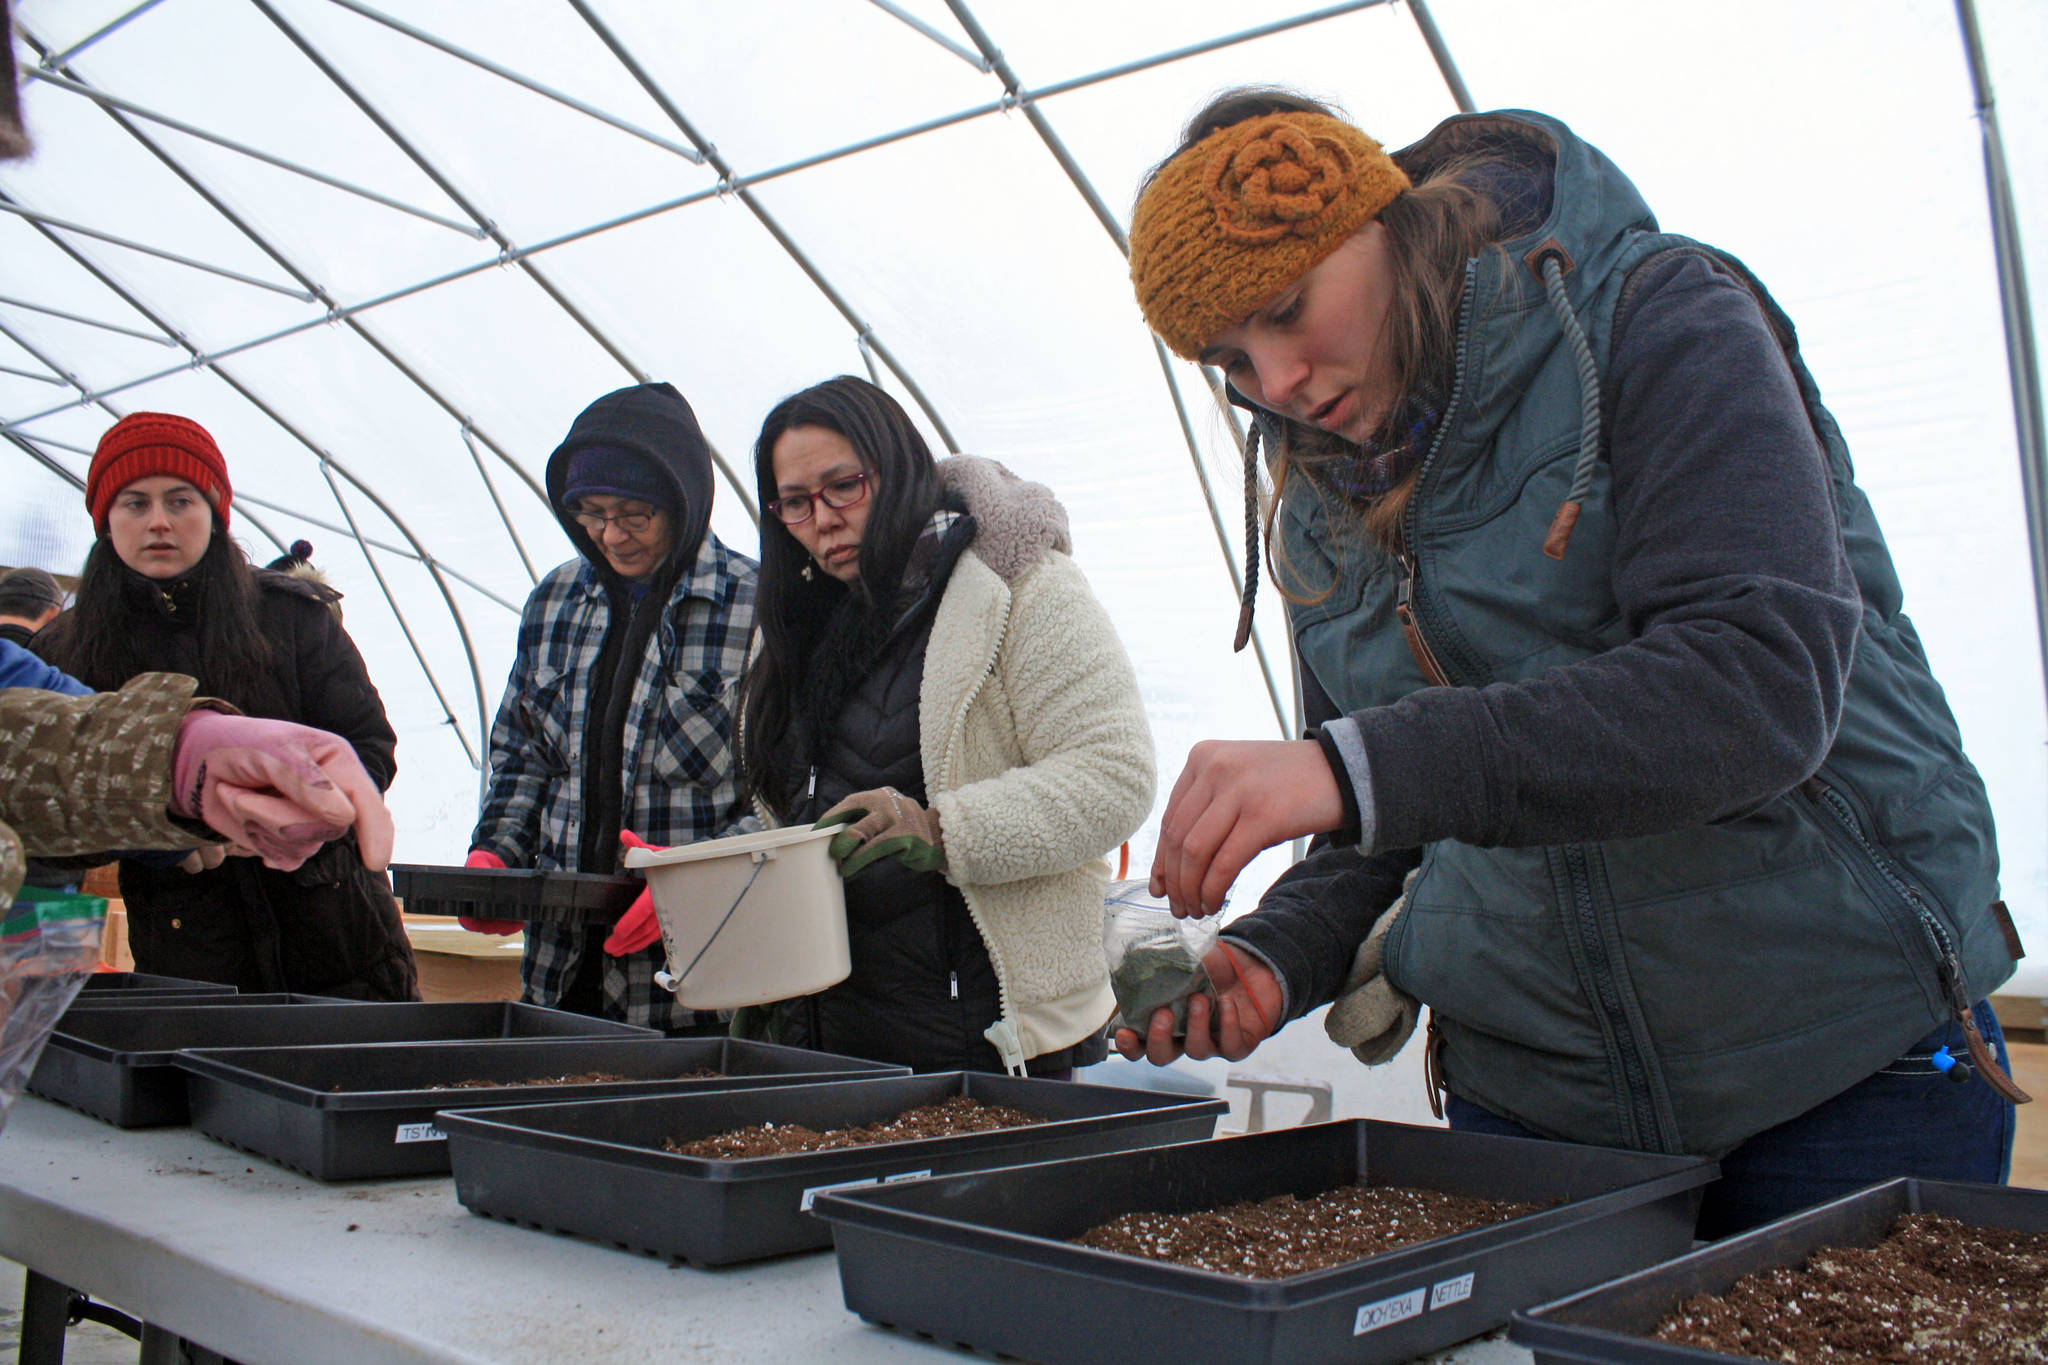 Jasmine Koster, right, plants seeds during at the Dena’ina Wellness Center greenhouse on Thursday, Jan. 25. The wellness center hosted a workshop on how to germinate local seeds traditionally. (Photo by Erin Thompson/Peninsula Clarion)